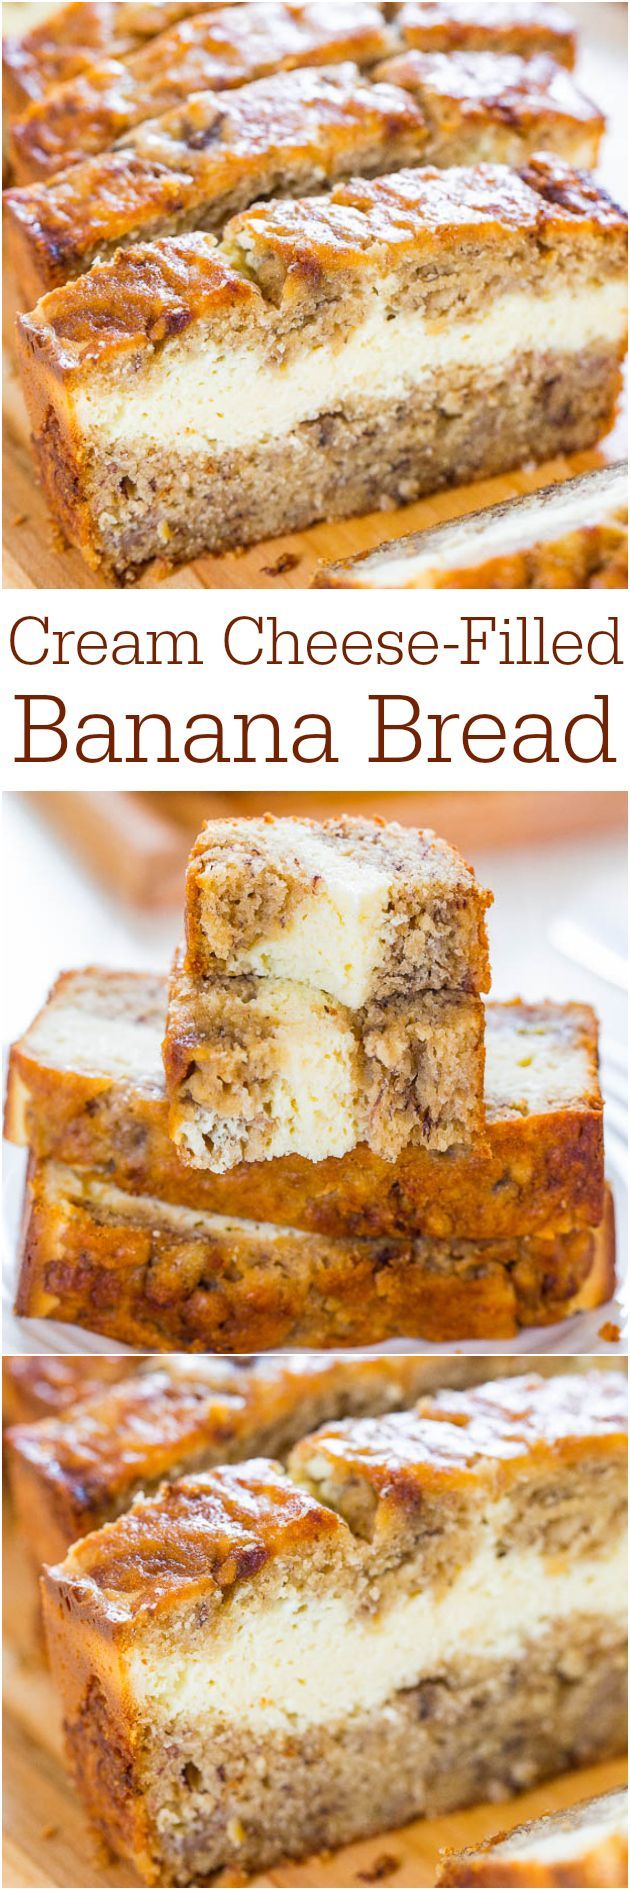 Cream Cheese-Filled Banana Bread – Banana bread that’s like having cheesecake baked in! Soft, fluffy, easy and tastes